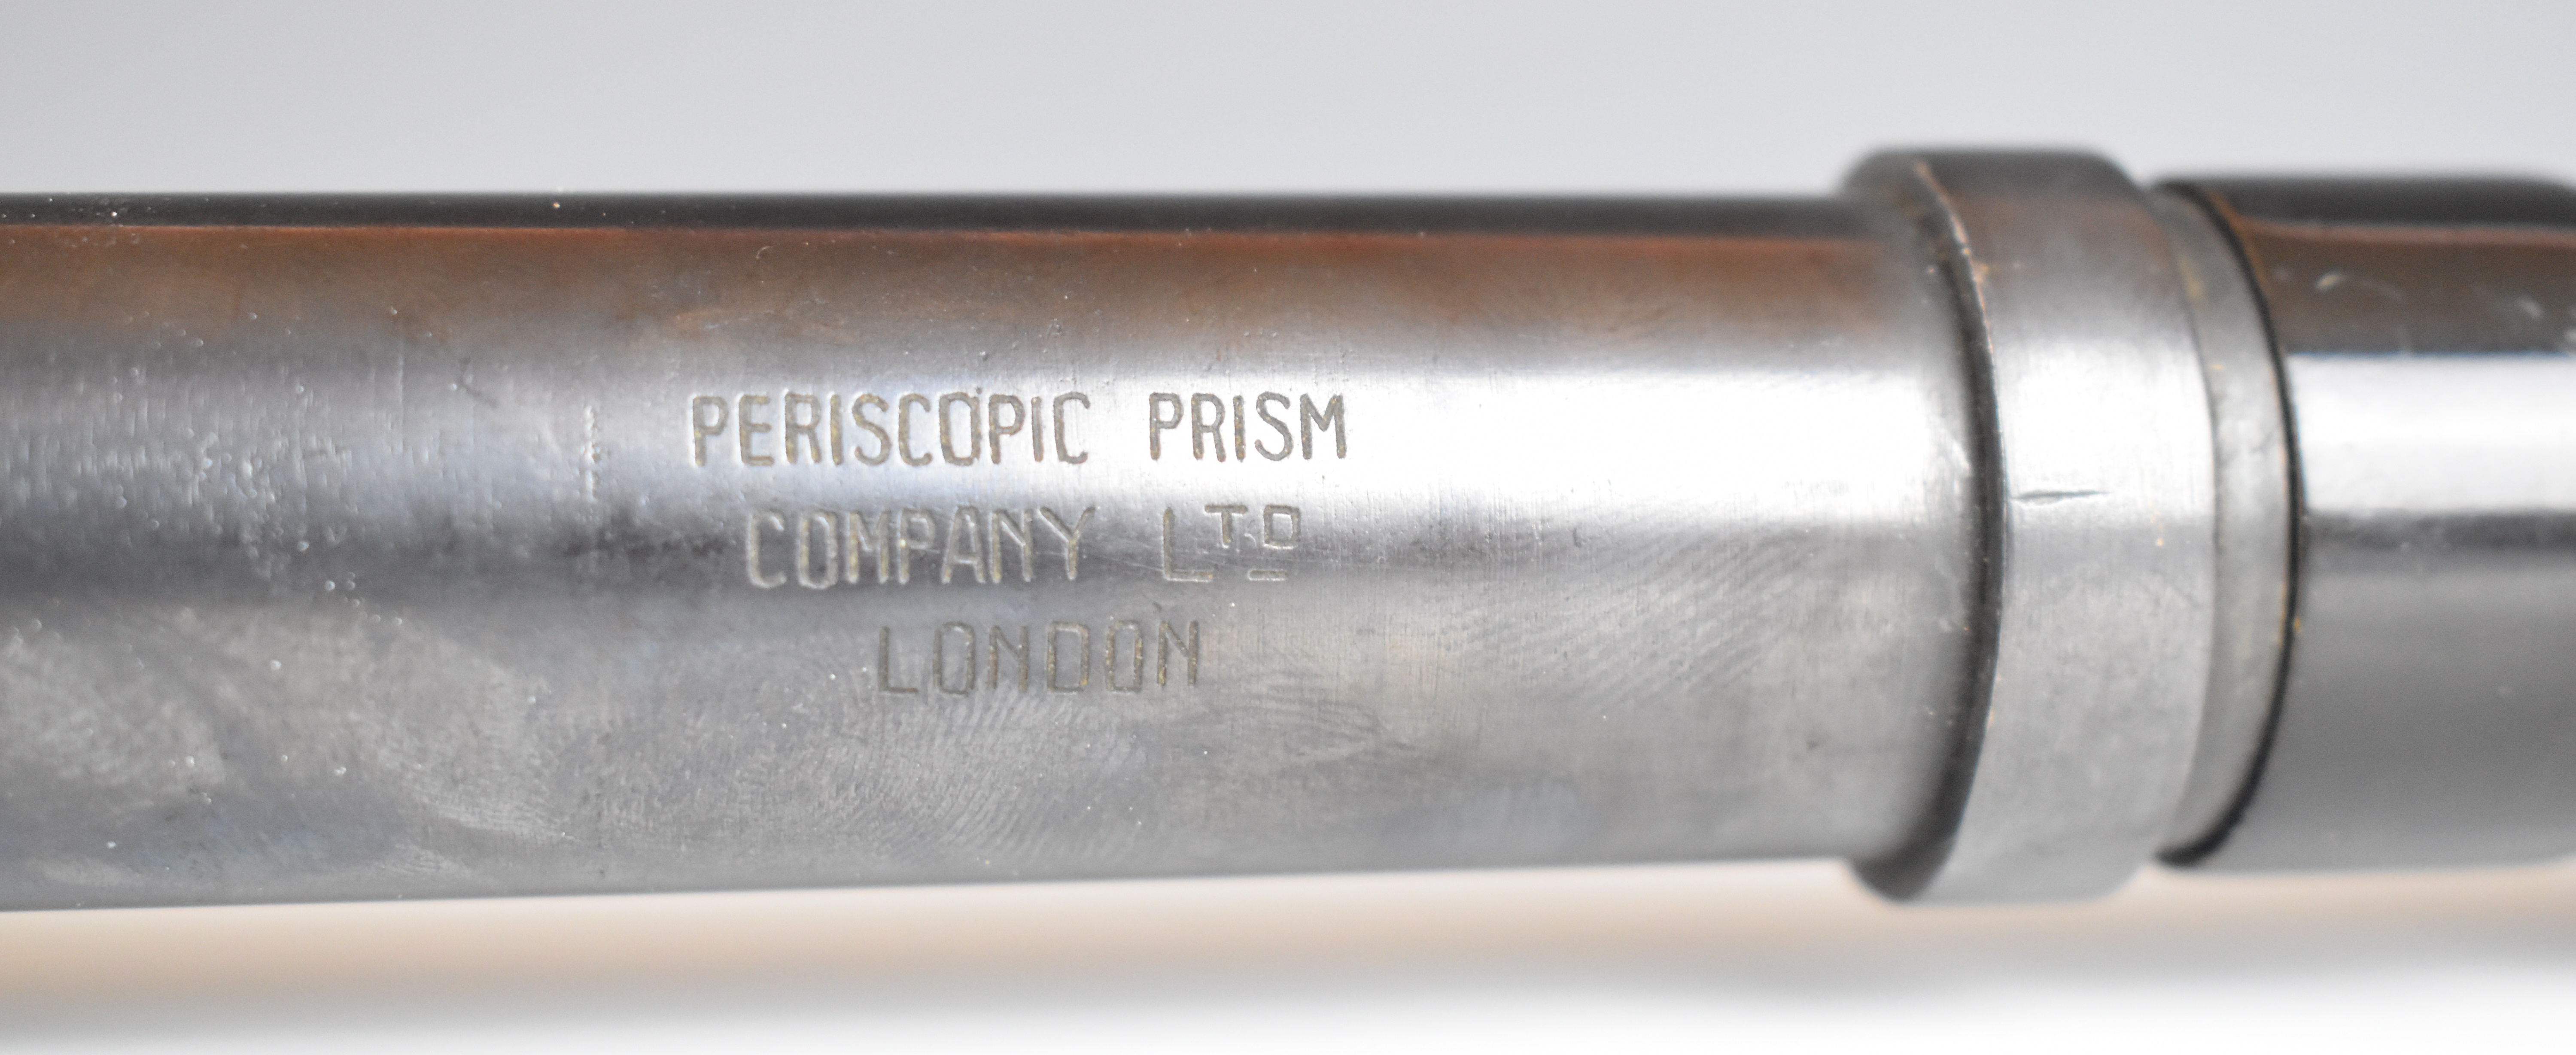 WWI Periscopic Prism Company Ltd of London Lee-Enfield adjustable sniper rifle scope, 31.3cm long. - Image 5 of 7